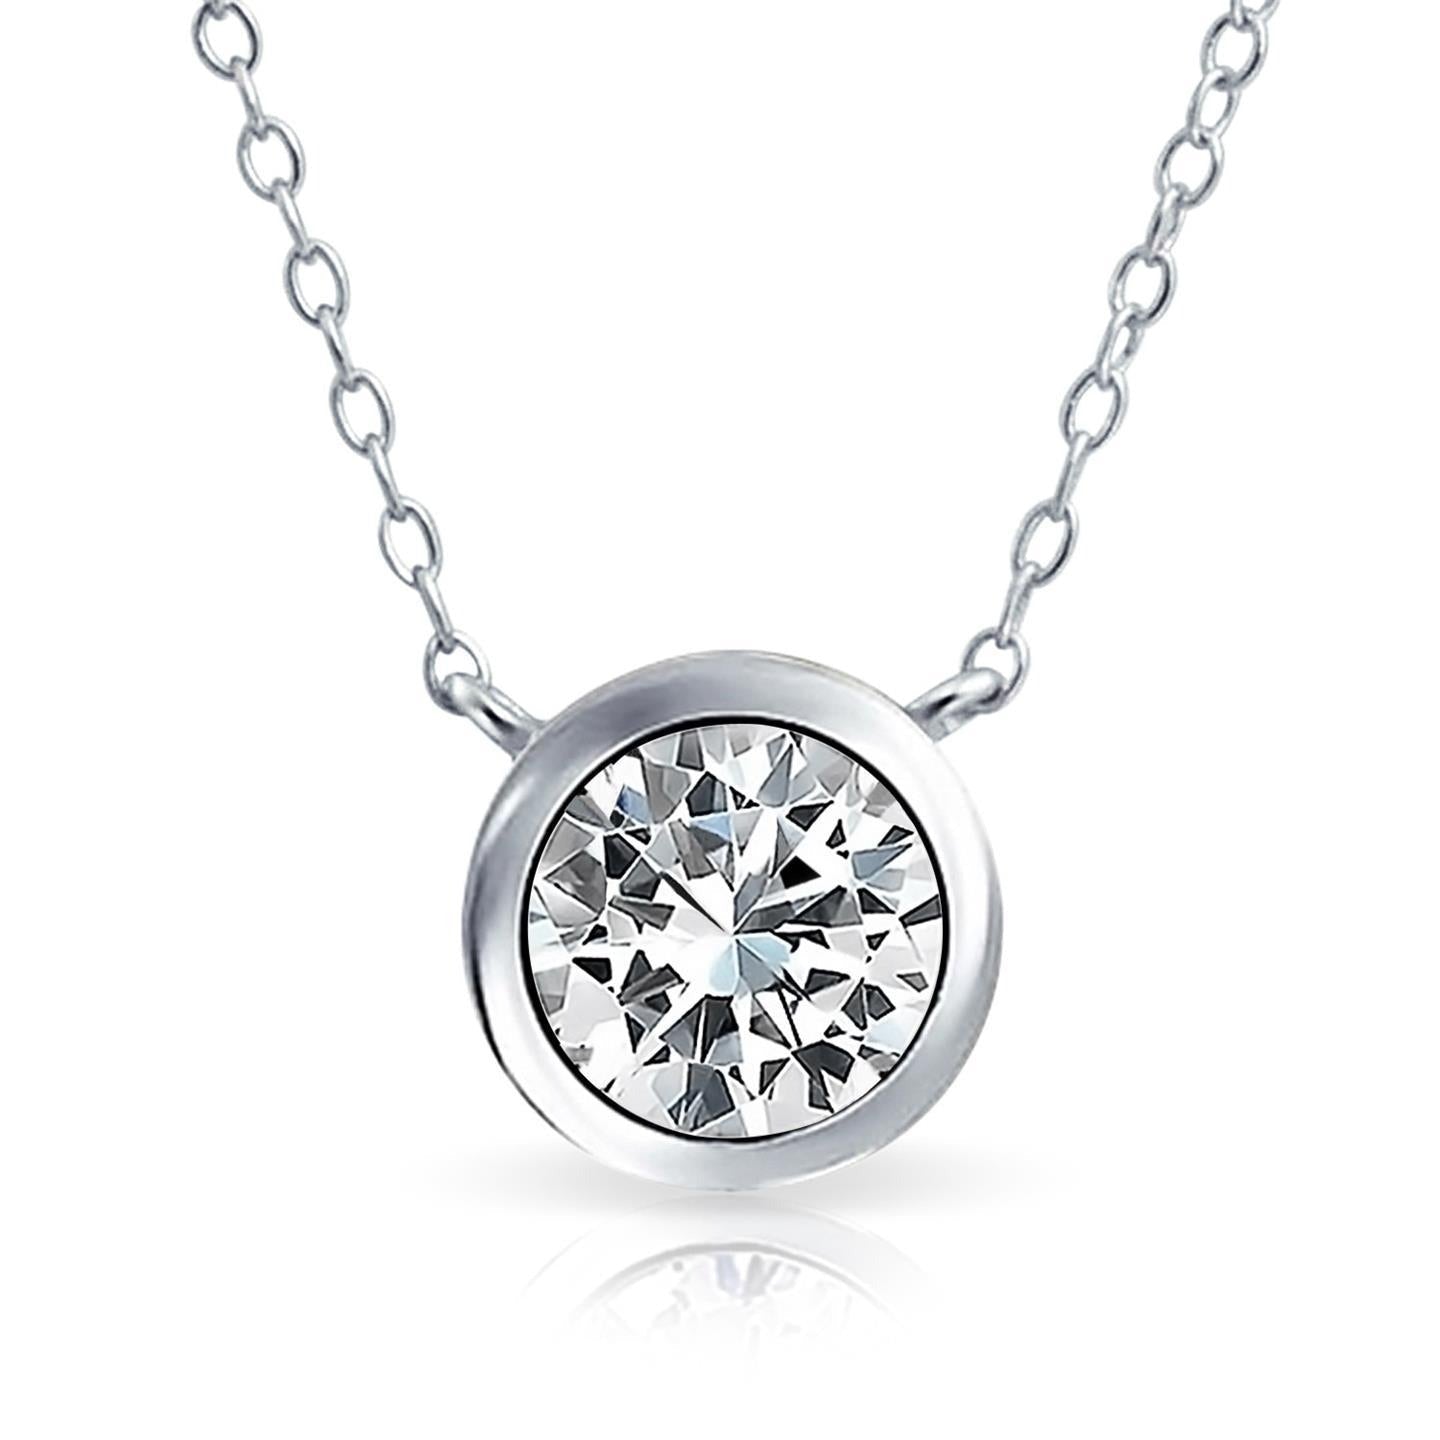 2 Carats Round Cut Real Solitaire Diamond Necklace Pendant White Gold 14K - Pendant-harrychadent.ca